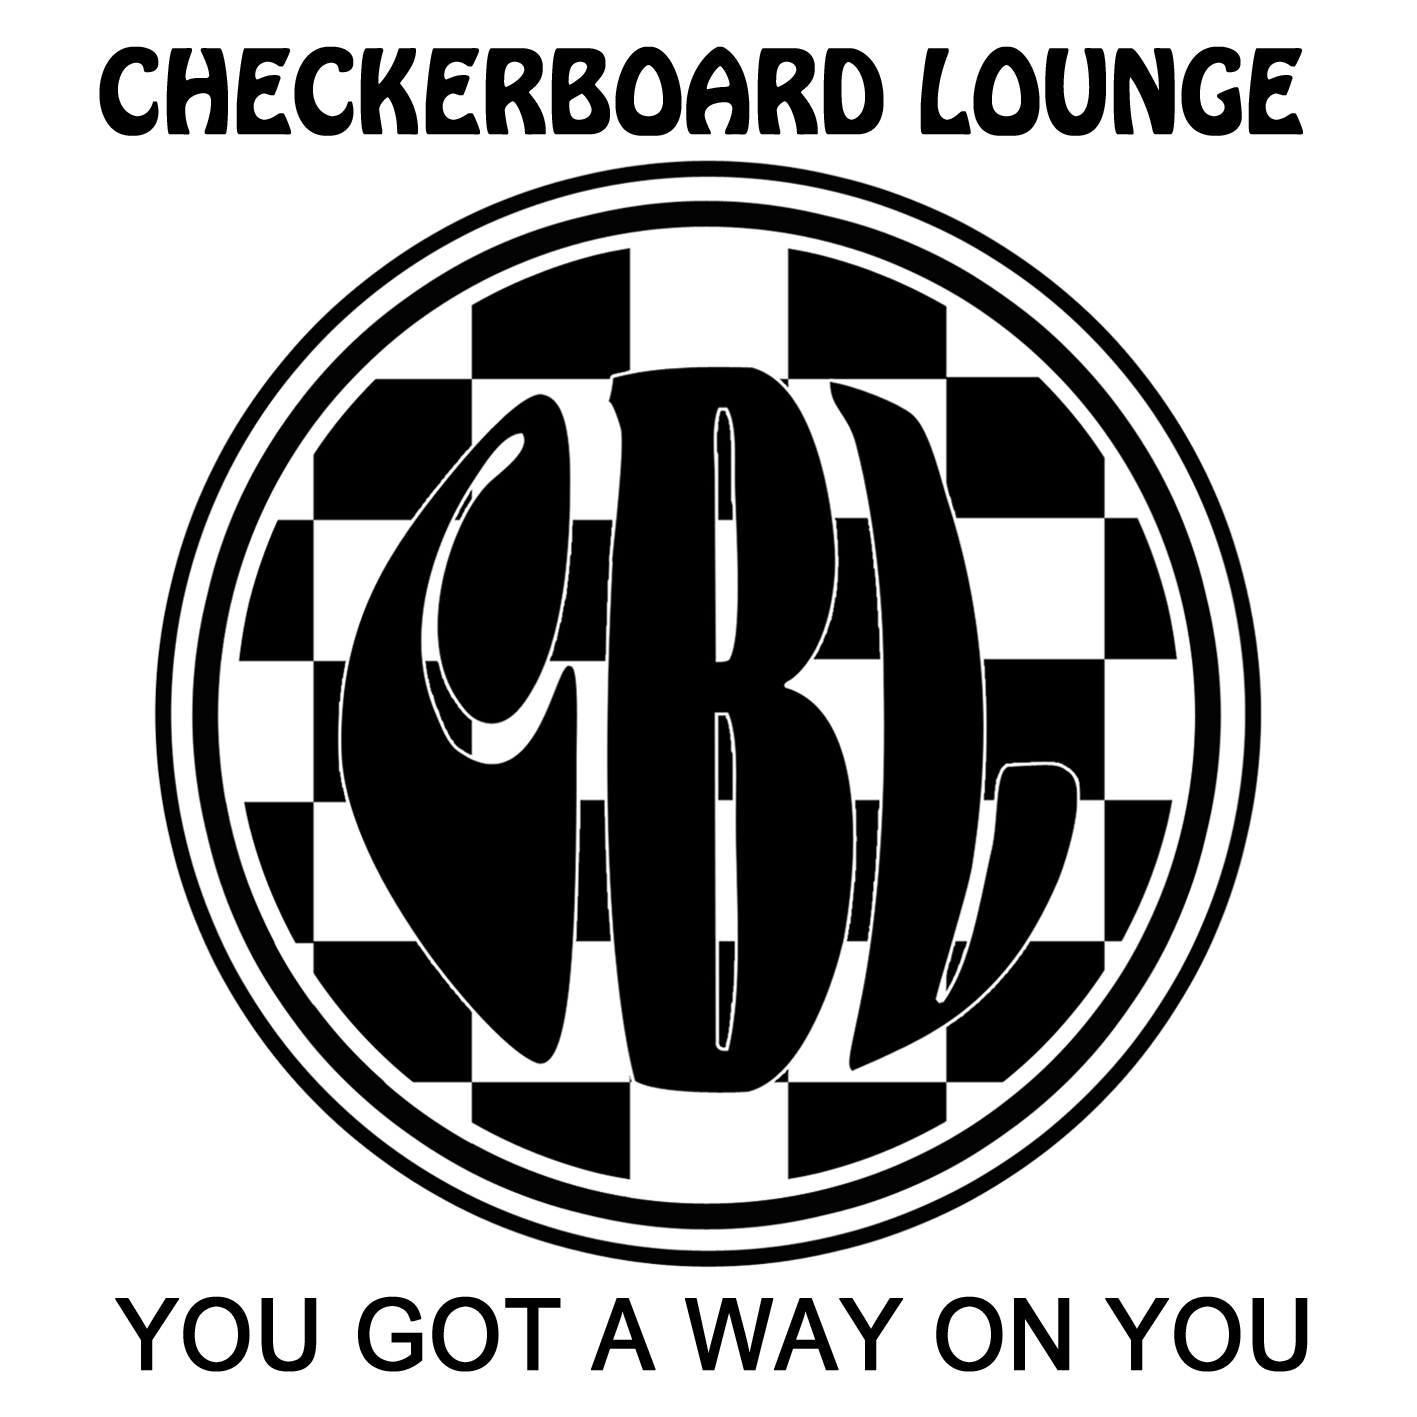 Checkerboard Lounge - You Got a Way on You